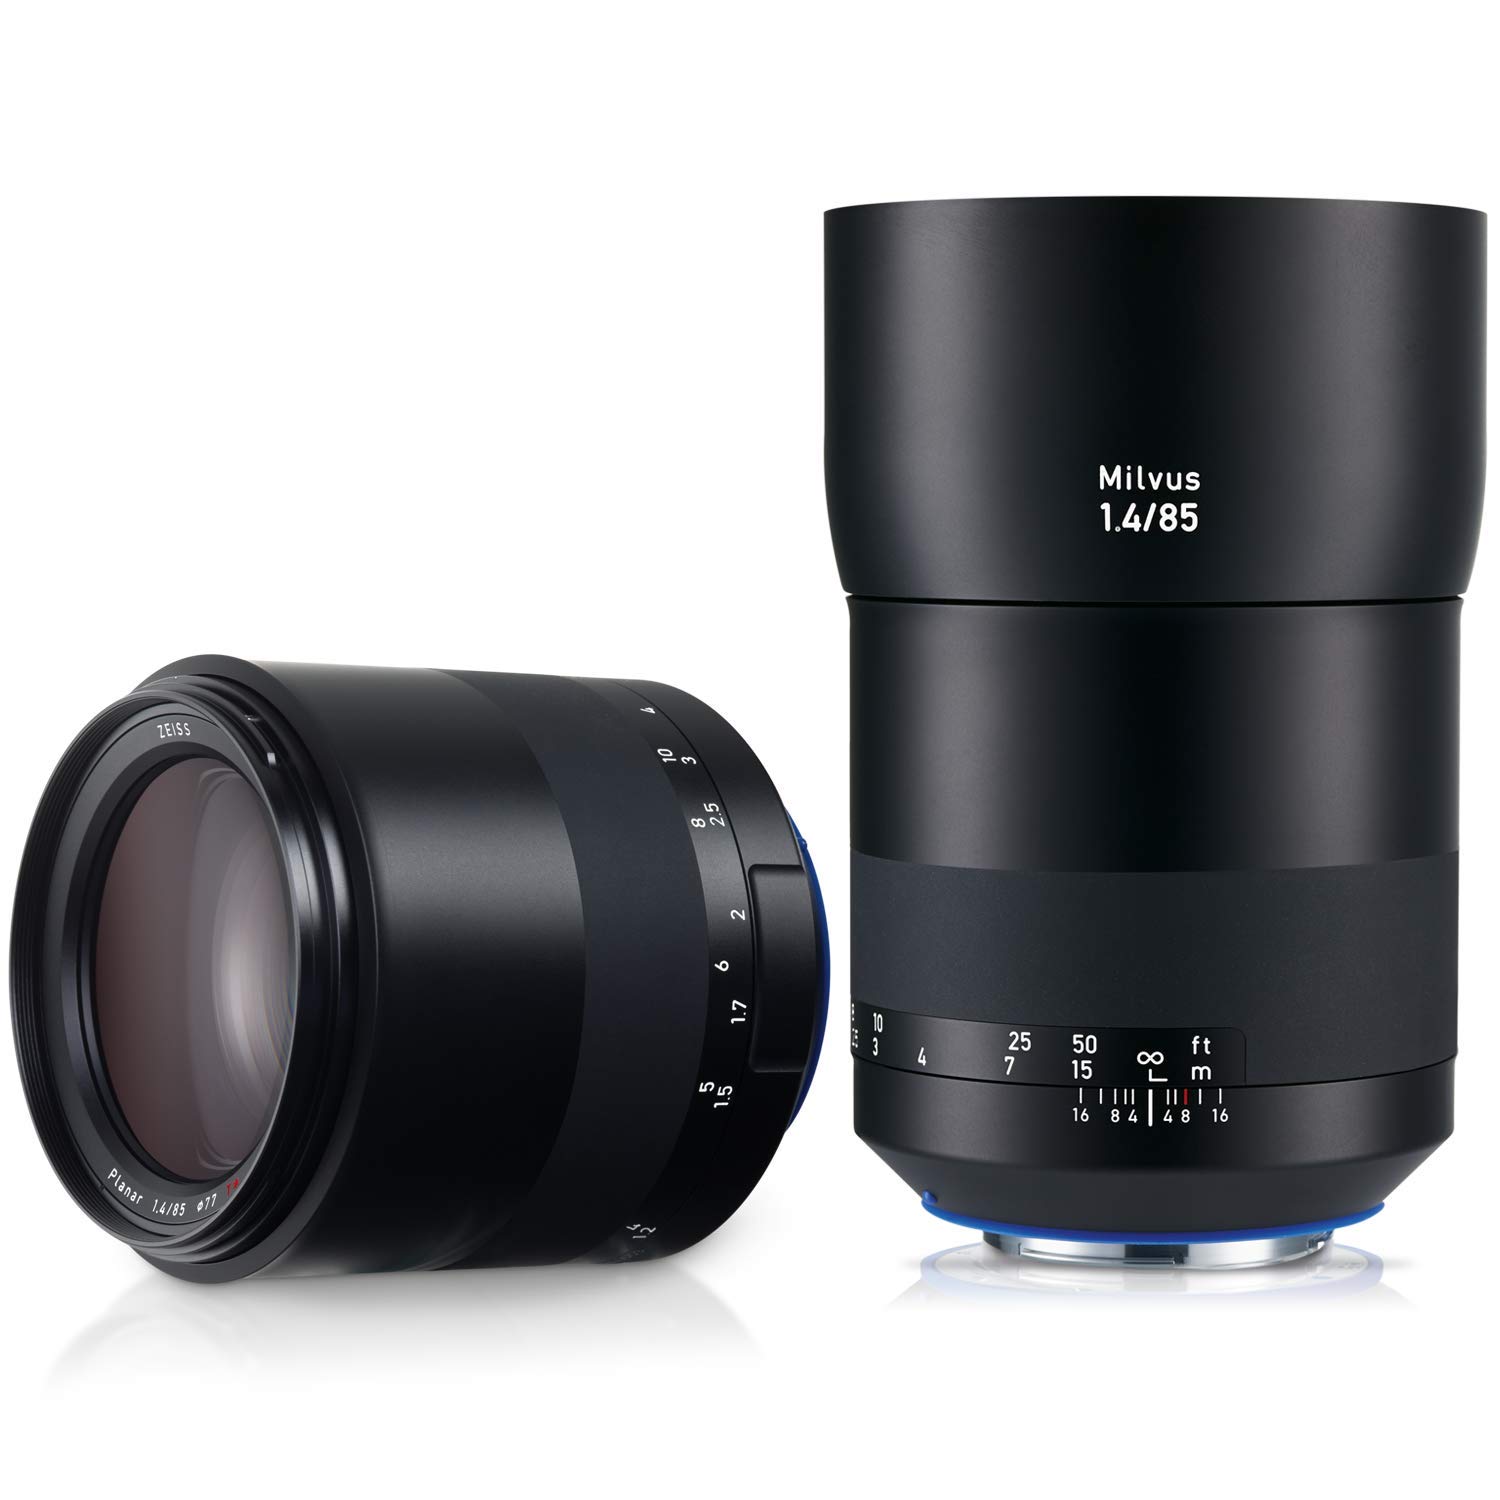 Zeiss Lenses: Up to 20% Off